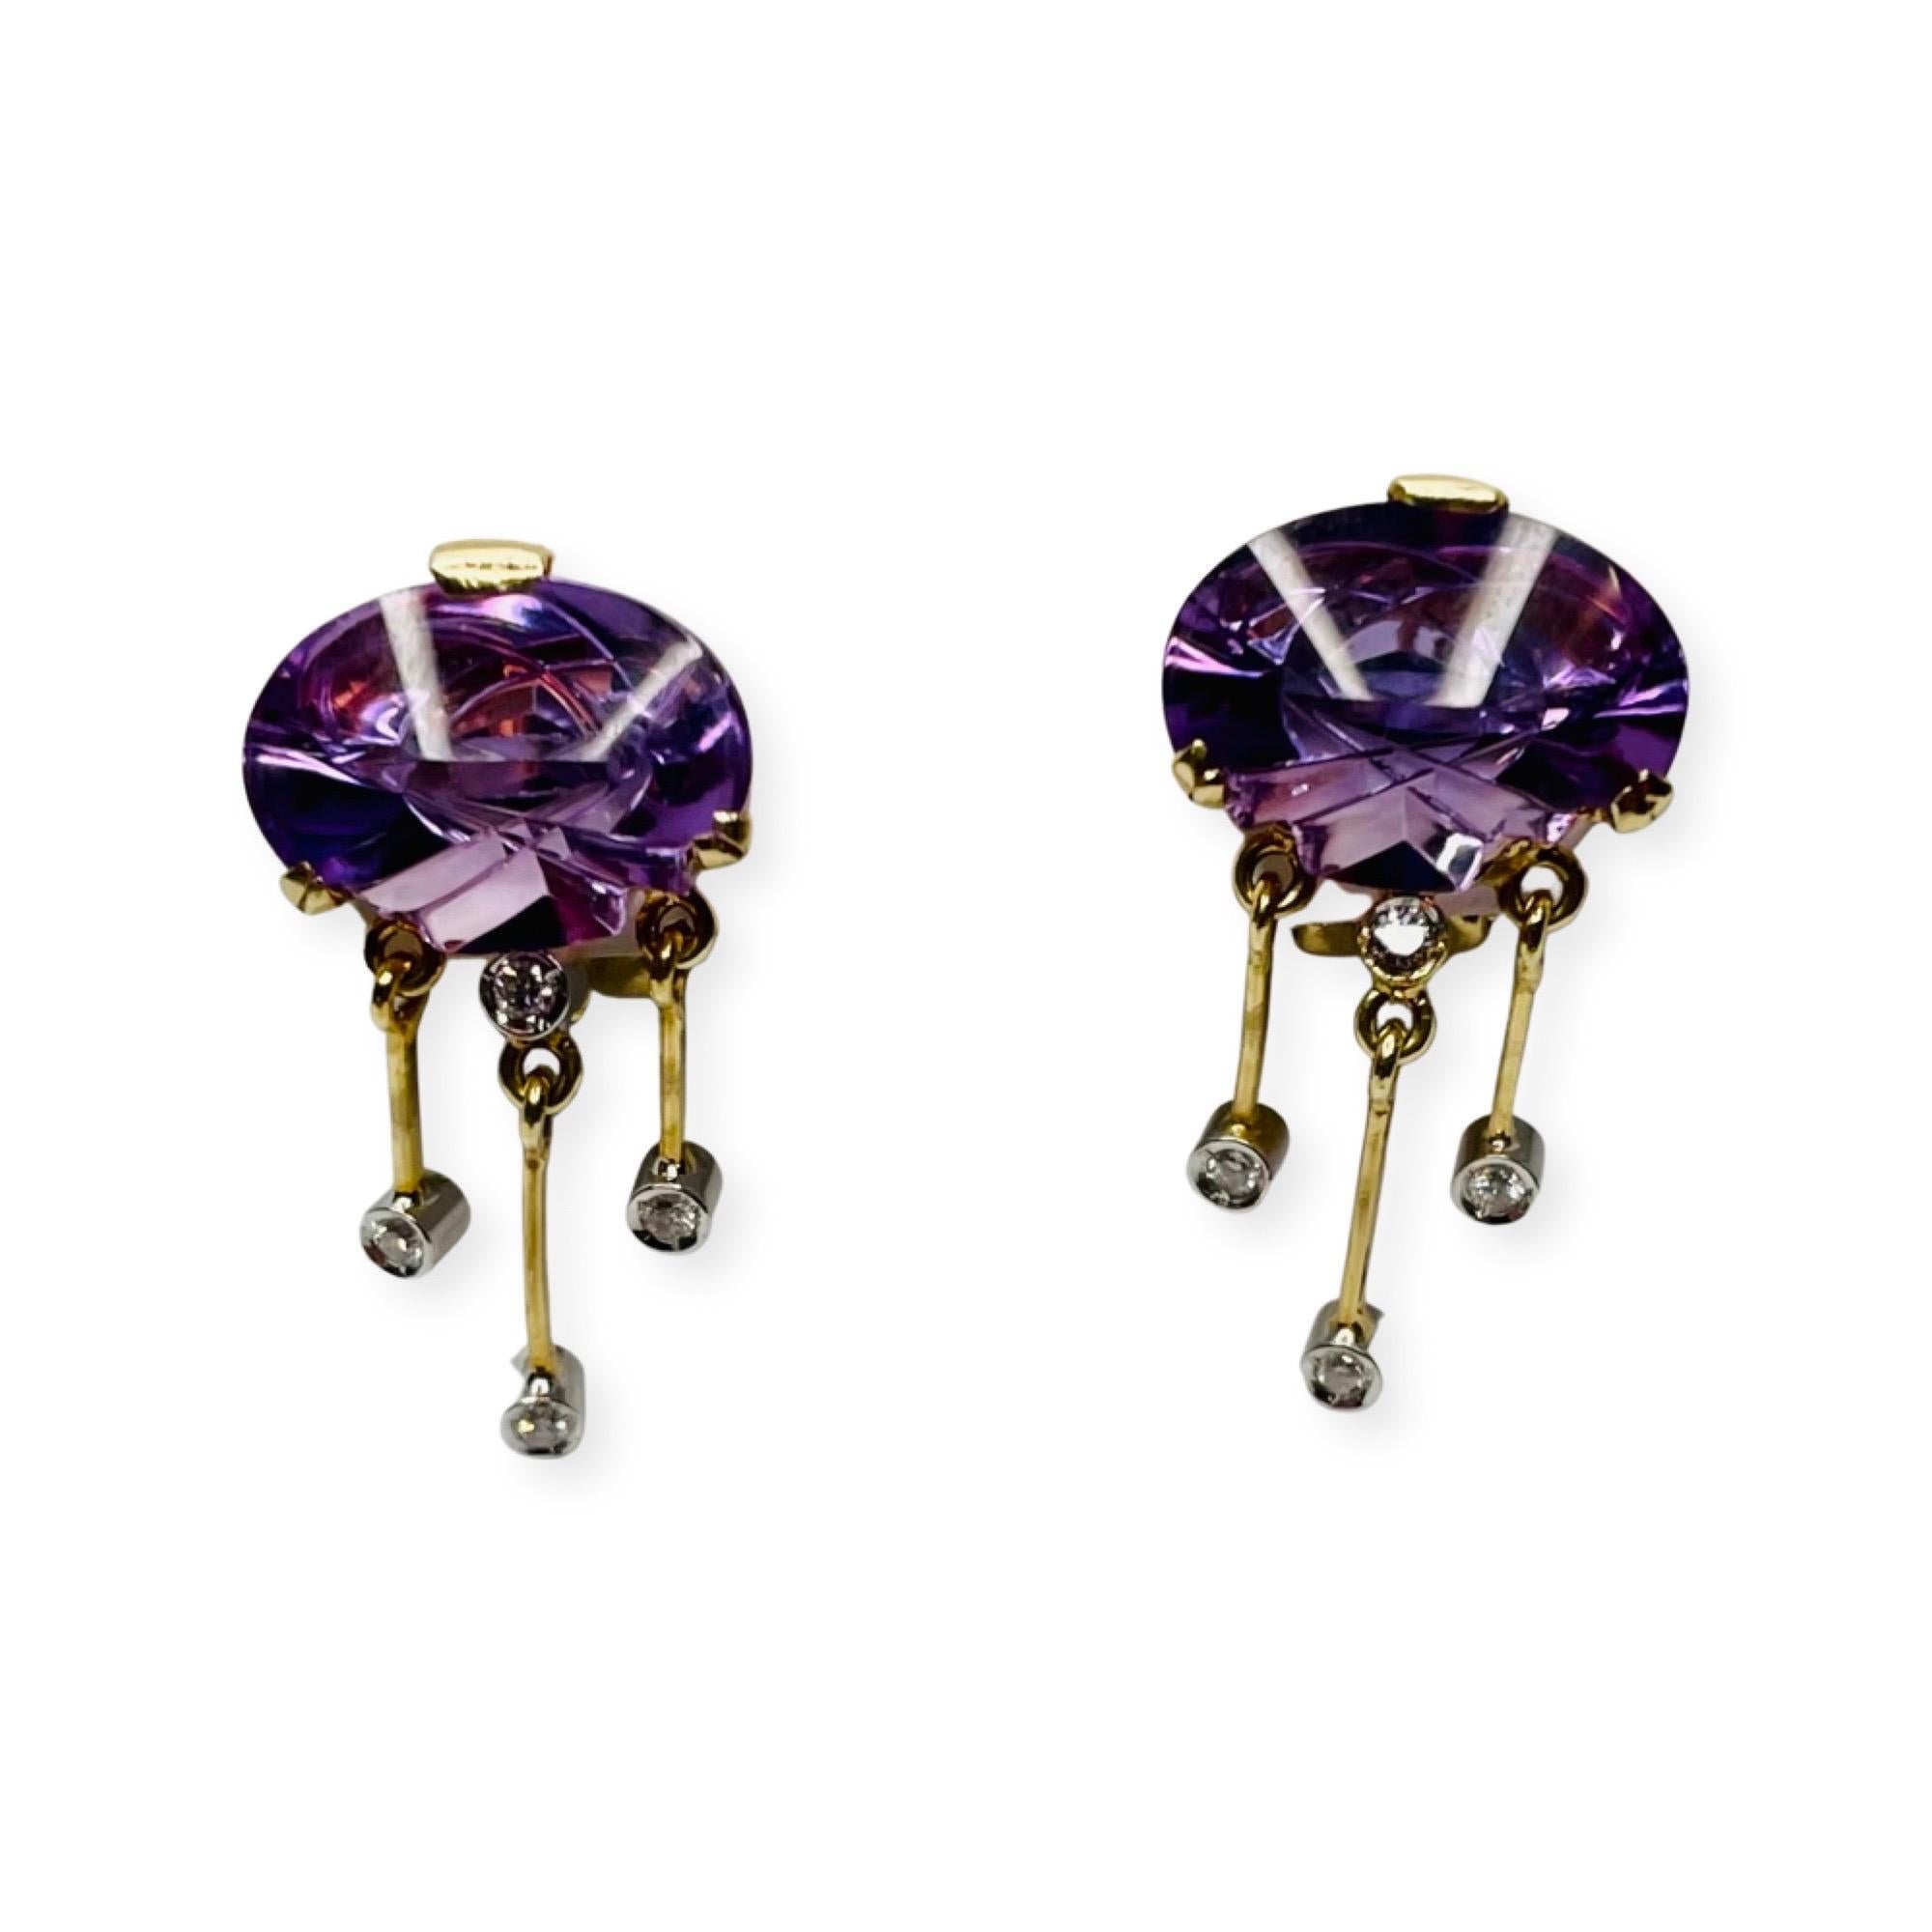 Kian 14K Yellow and White Gold Laser Cut Amethyst and Diamond Earrings. With the diamond dangles they are 17.15 mm long. The Amethysts are 3.38 mm by 10.24 mm. There are 6 diamonds, bezel set, for a total diamond weight of 0.10 carats. They are full